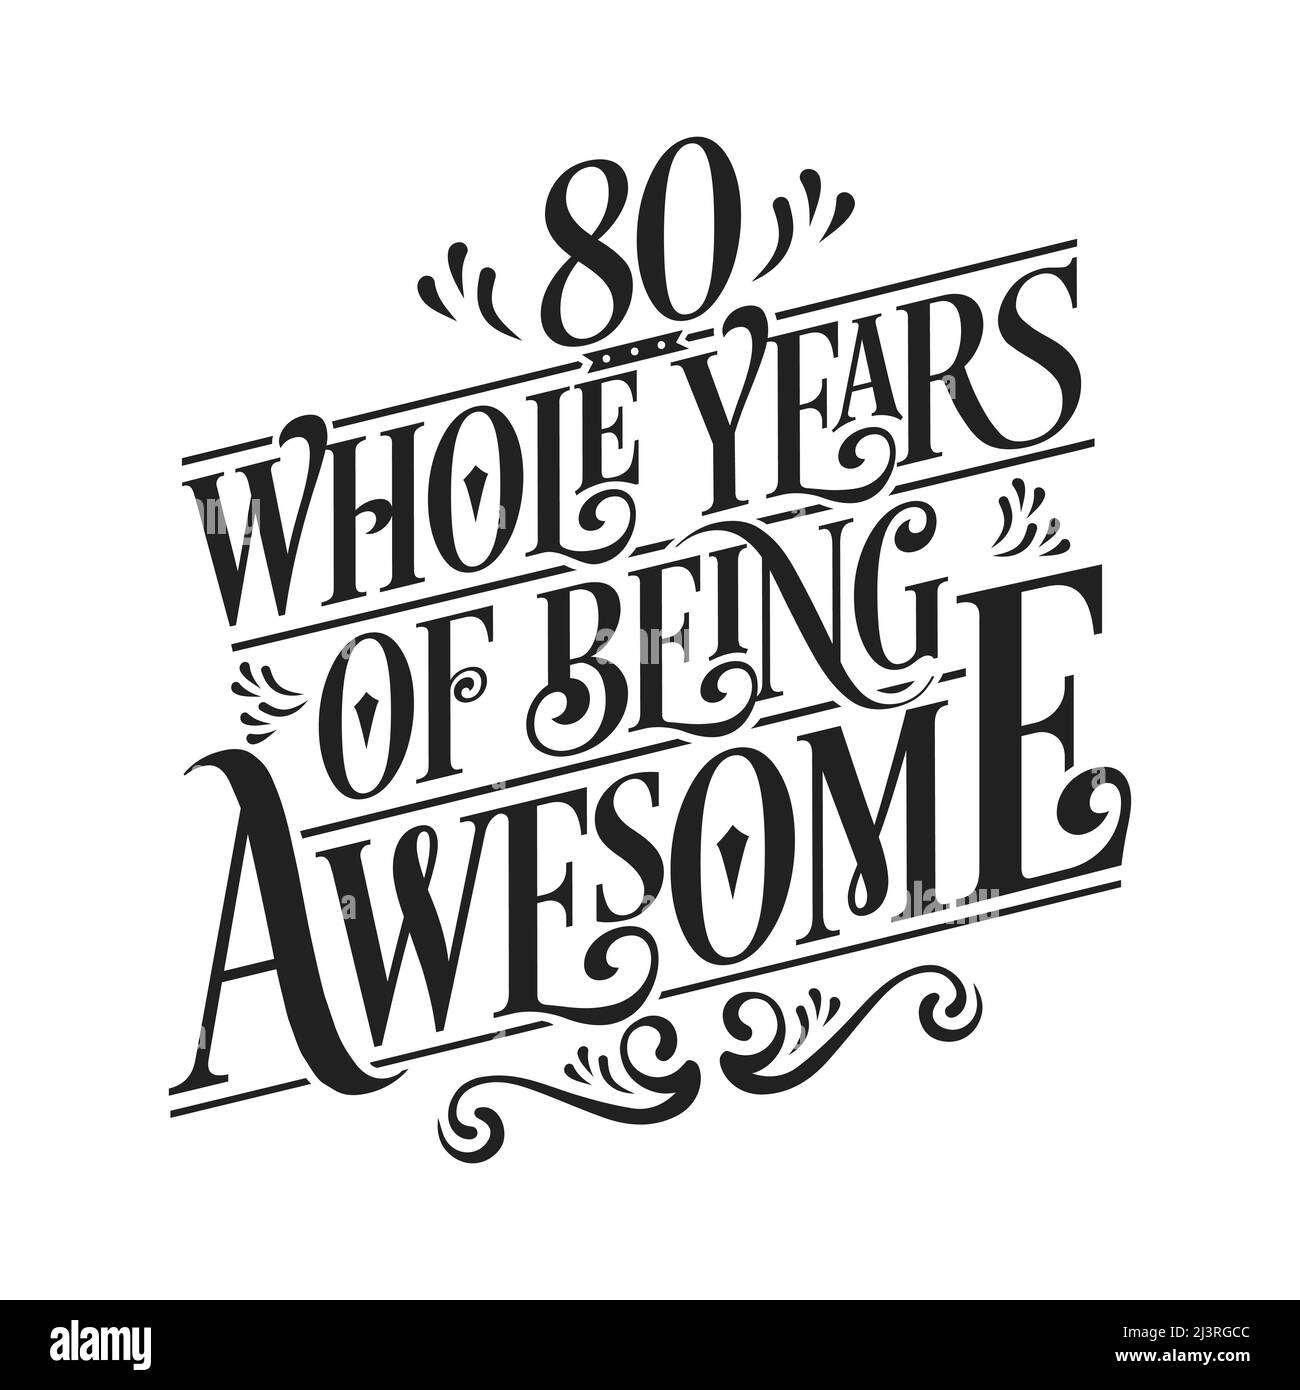 80 whole years of being awesome. 80th birthday celebration lettering Stock Vector